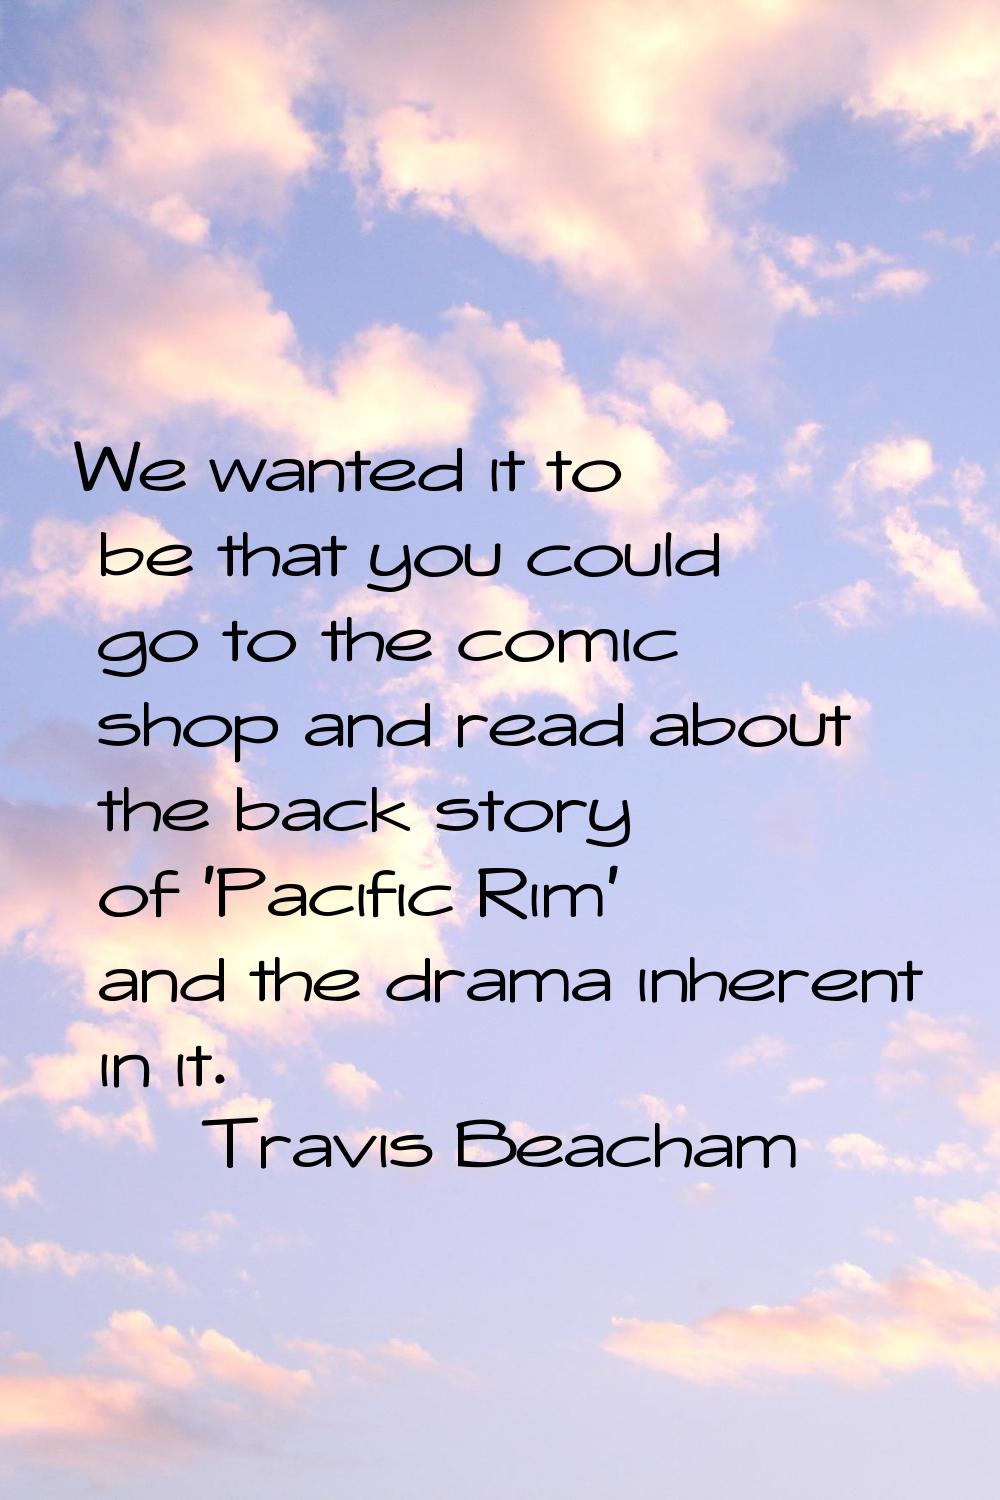 We wanted it to be that you could go to the comic shop and read about the back story of 'Pacific Ri